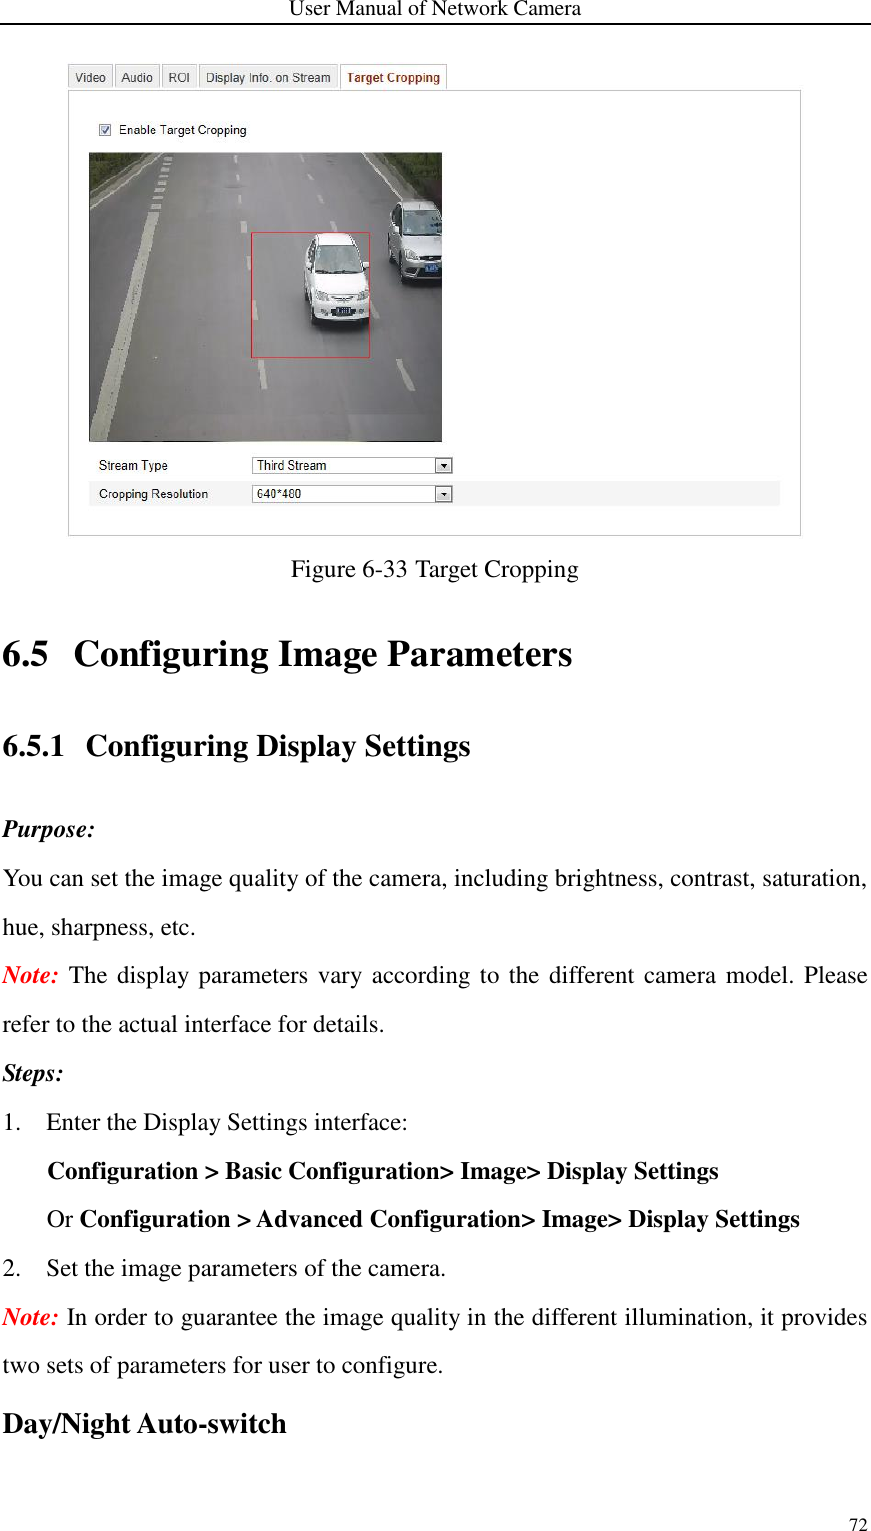 User Manual of Network Camera 72   Figure 6-33 Target Cropping 6.5 Configuring Image Parameters 6.5.1 Configuring Display Settings Purpose: You can set the image quality of the camera, including brightness, contrast, saturation, hue, sharpness, etc. Note: The display parameters vary  according to the different camera model. Please refer to the actual interface for details. Steps: 1. Enter the Display Settings interface: Configuration &gt; Basic Configuration&gt; Image&gt; Display Settings Or Configuration &gt; Advanced Configuration&gt; Image&gt; Display Settings 2. Set the image parameters of the camera. Note: In order to guarantee the image quality in the different illumination, it provides two sets of parameters for user to configure. Day/Night Auto-switch 